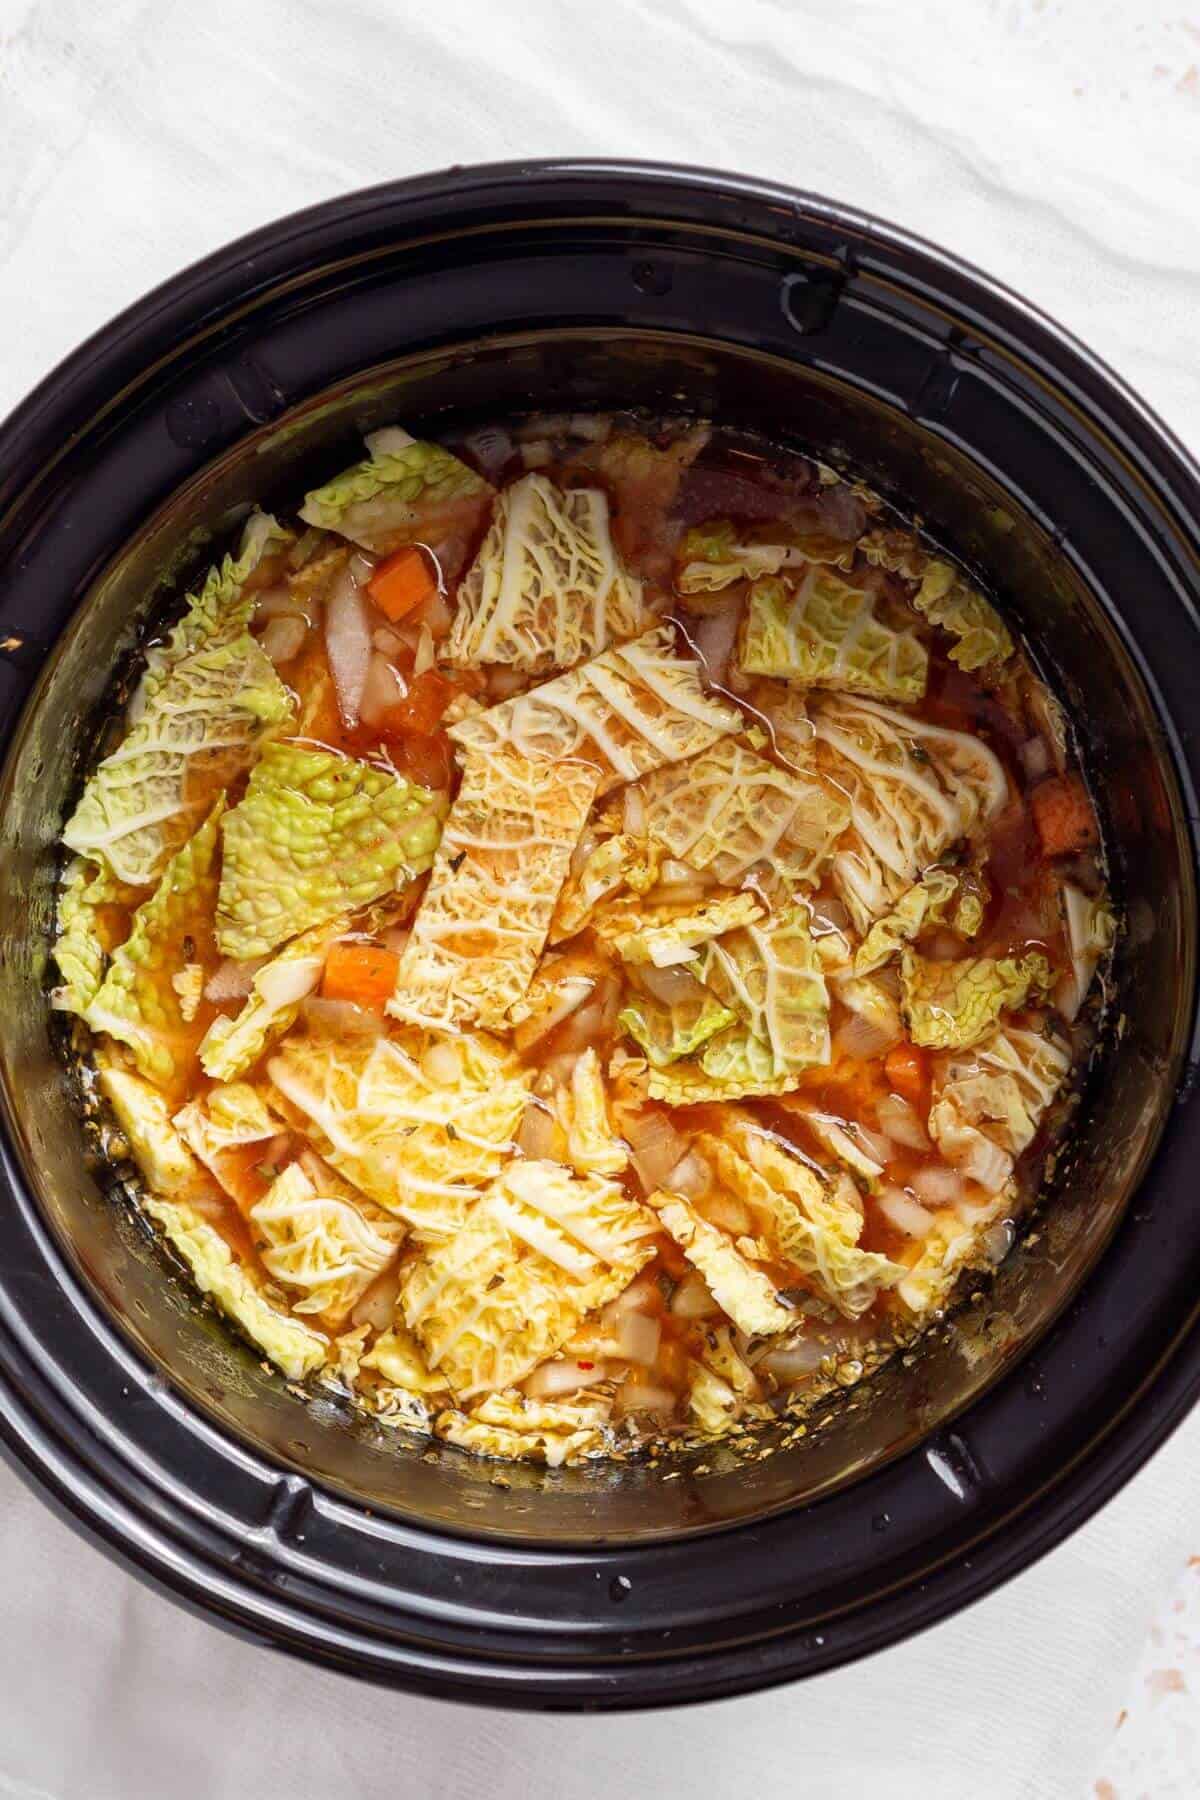 A crock pot filled with broth and vegetables.